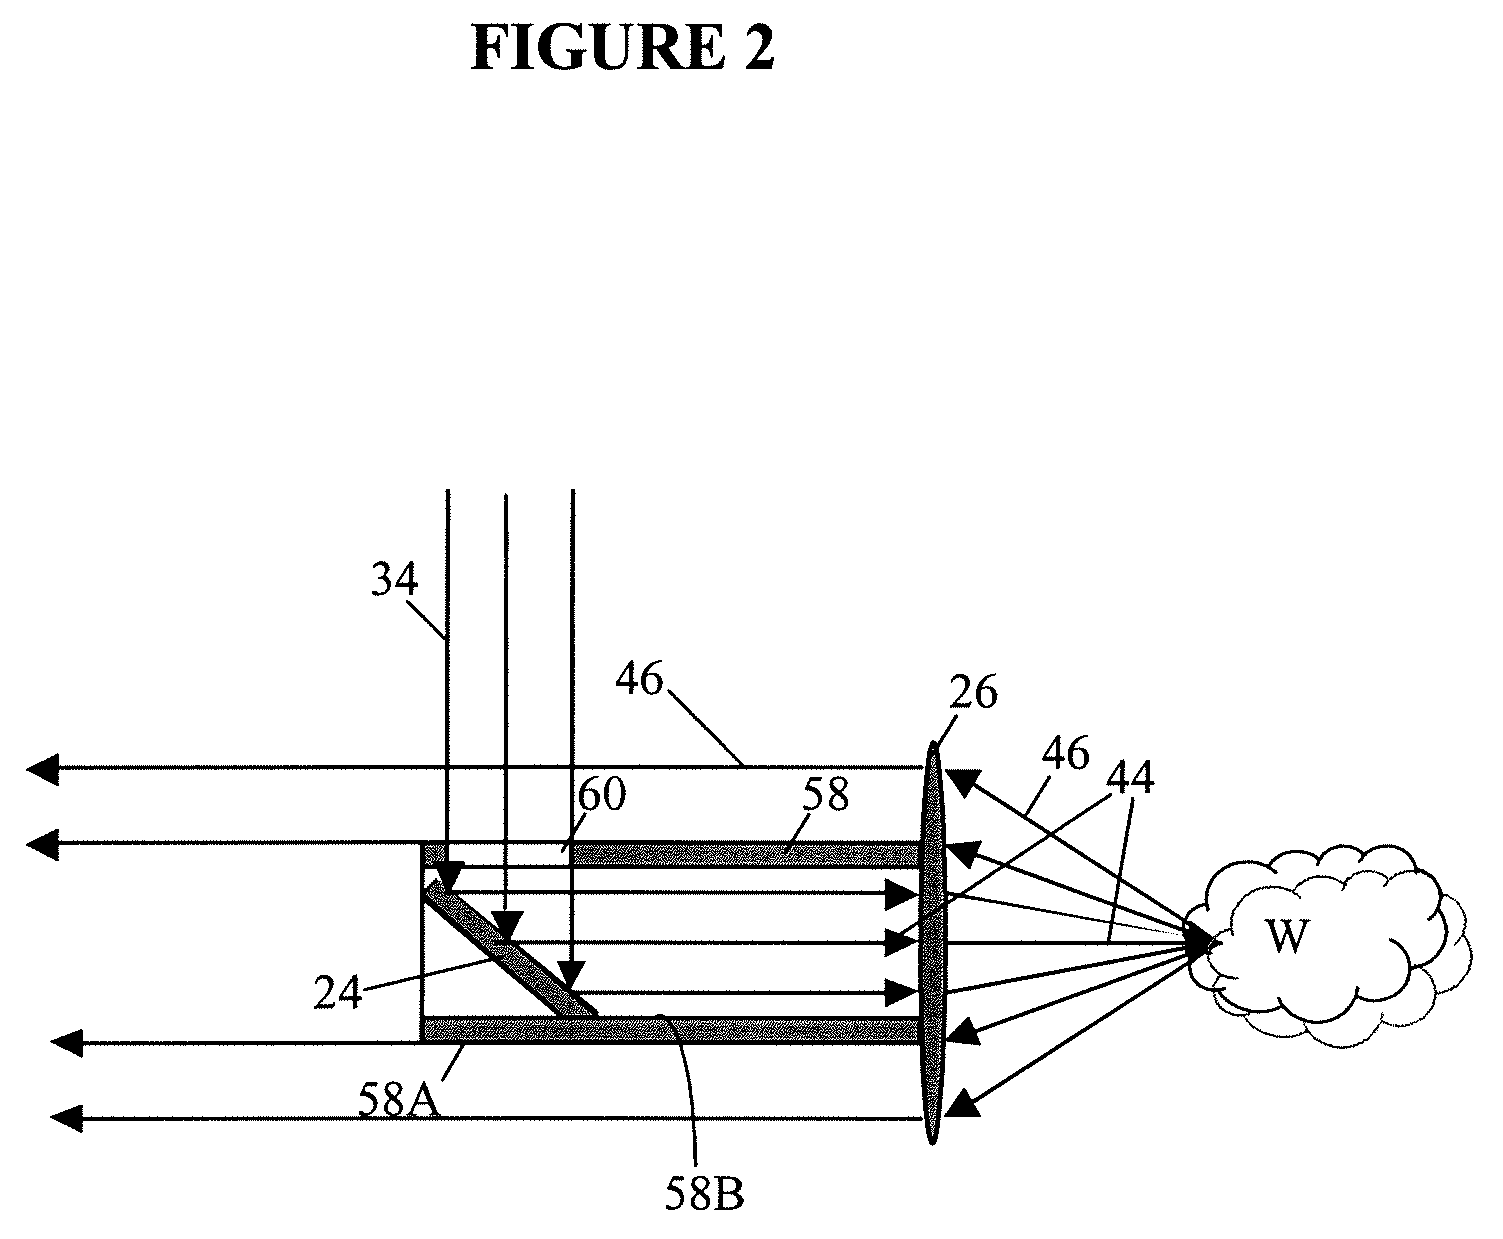 Optical analysis systems and methods for dynamic, high-speed detection and real-time multivariate optical computing